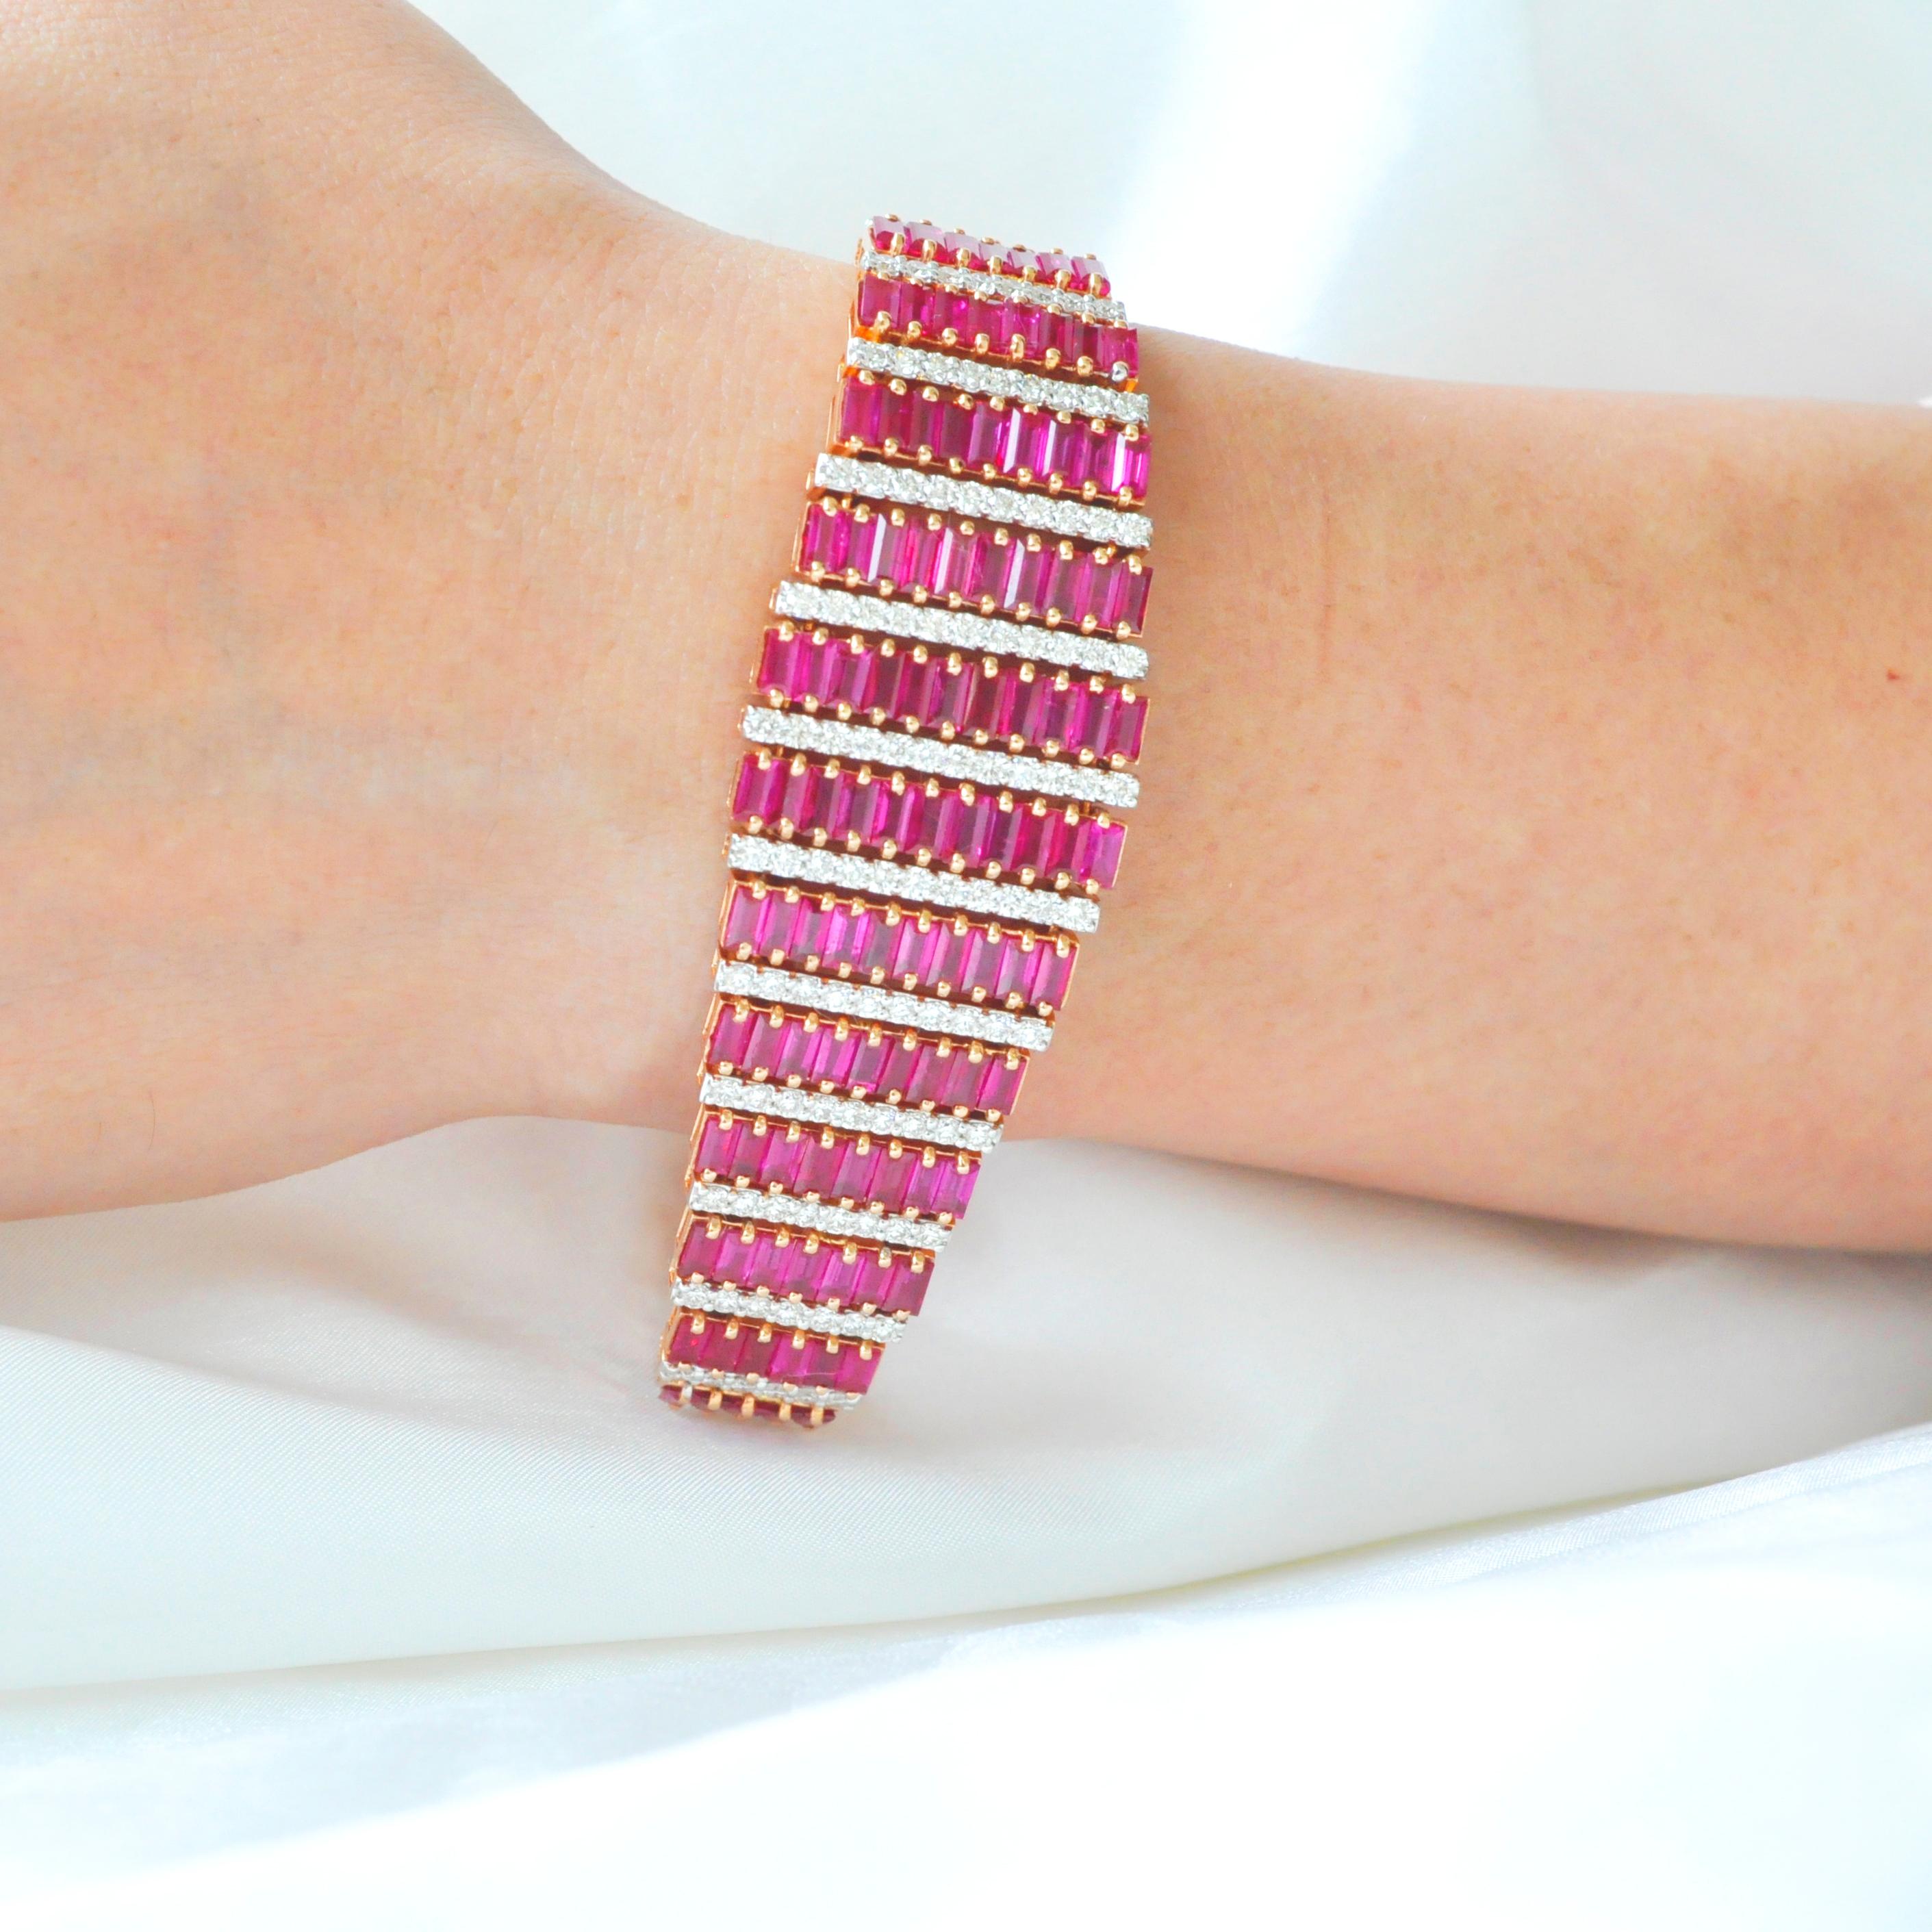 18 karat rose gold 21.73 carats mozambique ruby baguette diamond contemporary bracelet.

Keeping up with the…red carpet look! Presenting the 18 karat rose gold 21.73 carats mozambique ruby baguettes diamond bracelet. In this 18 karat rose gold